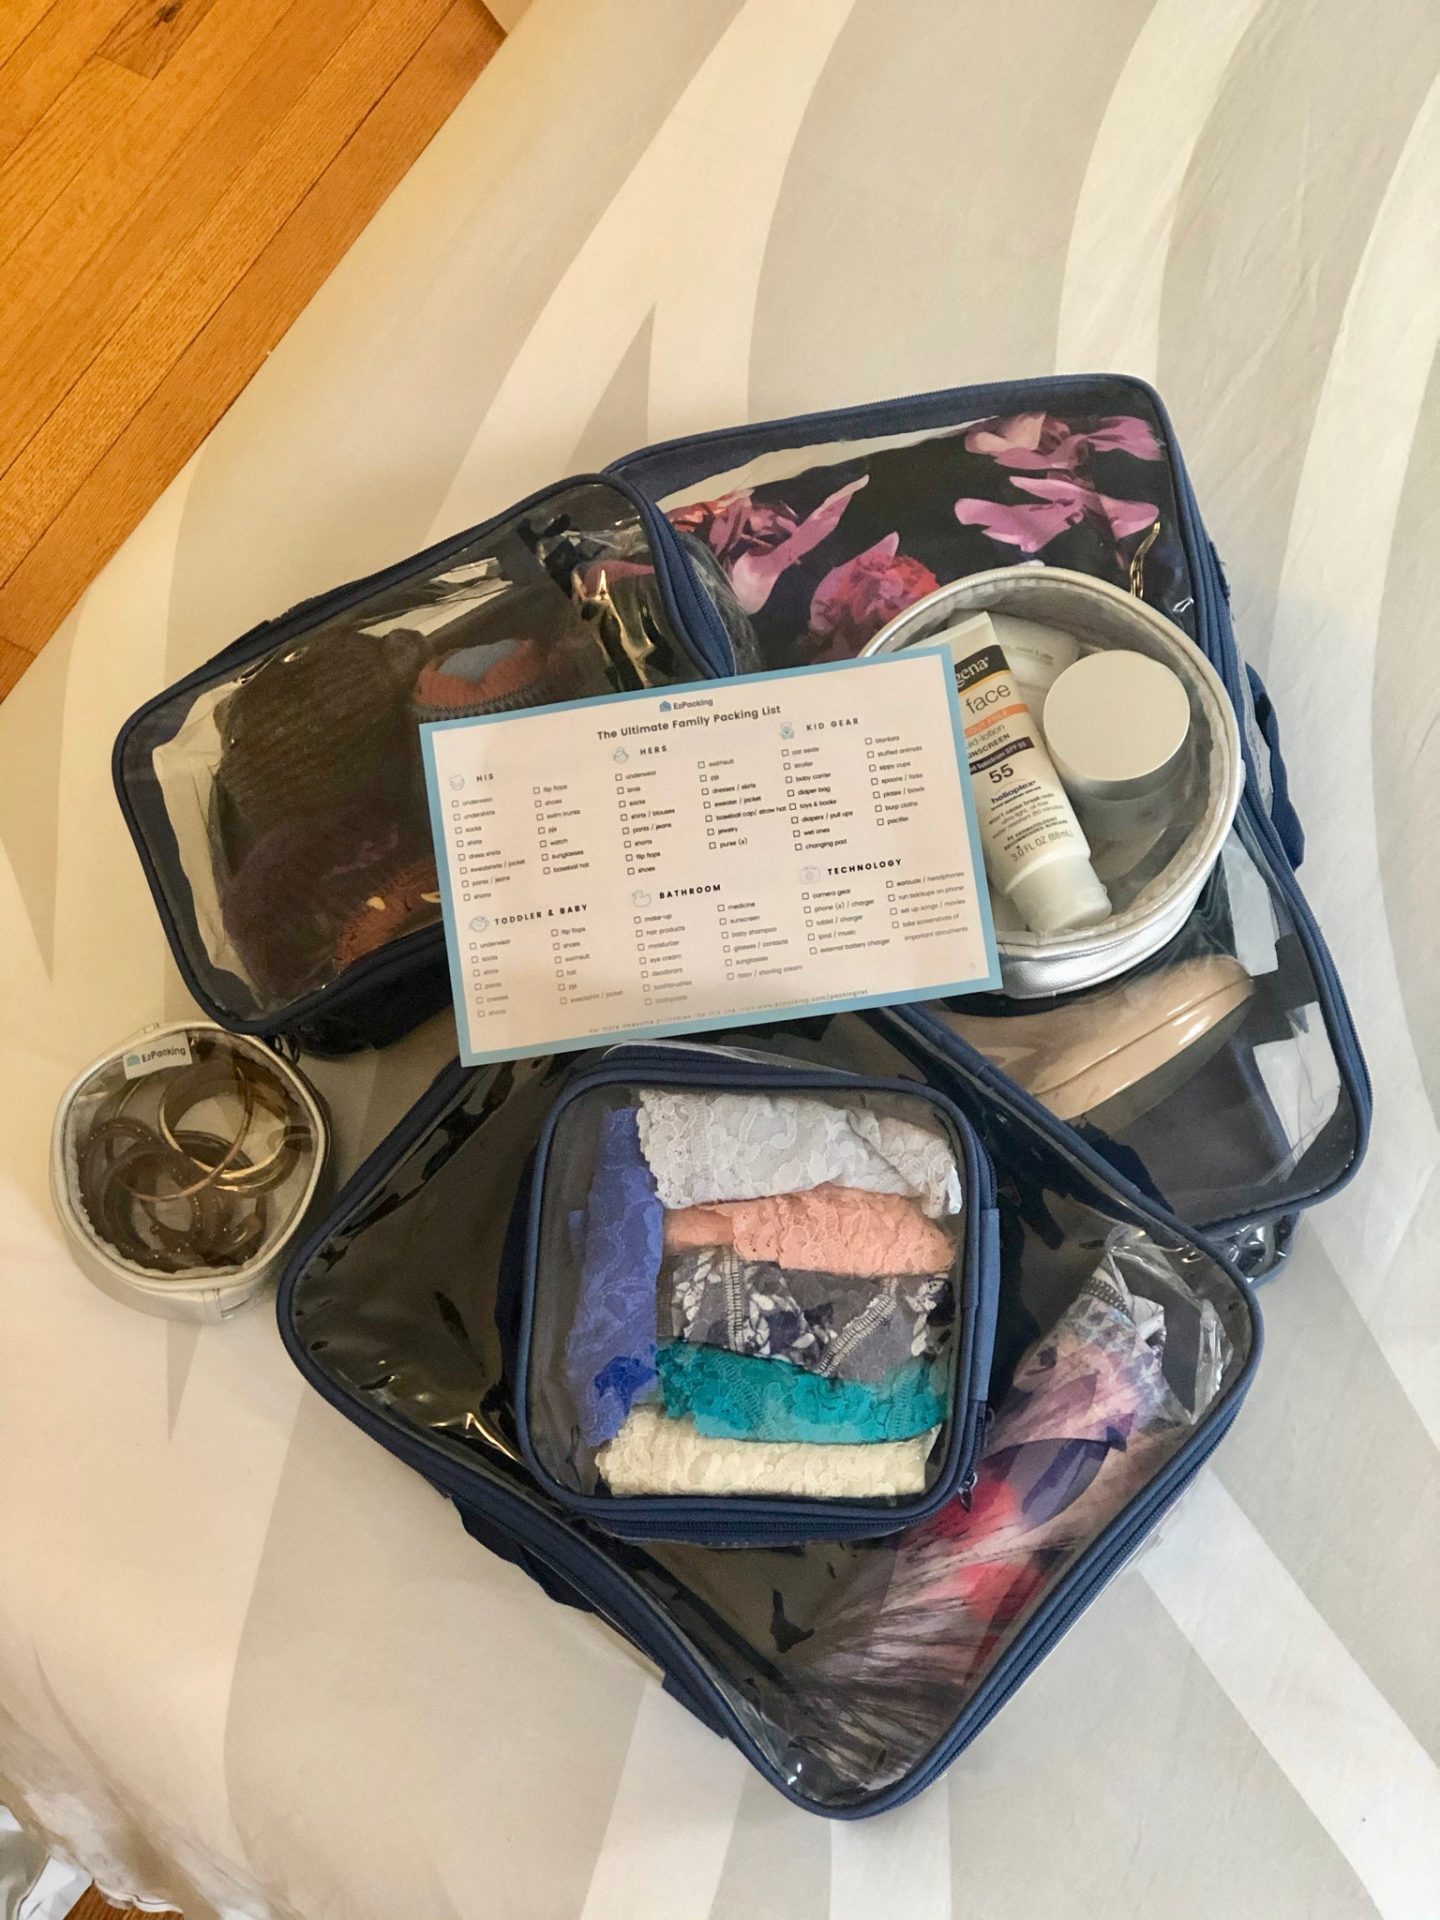 Clear packing cubes and a packing list